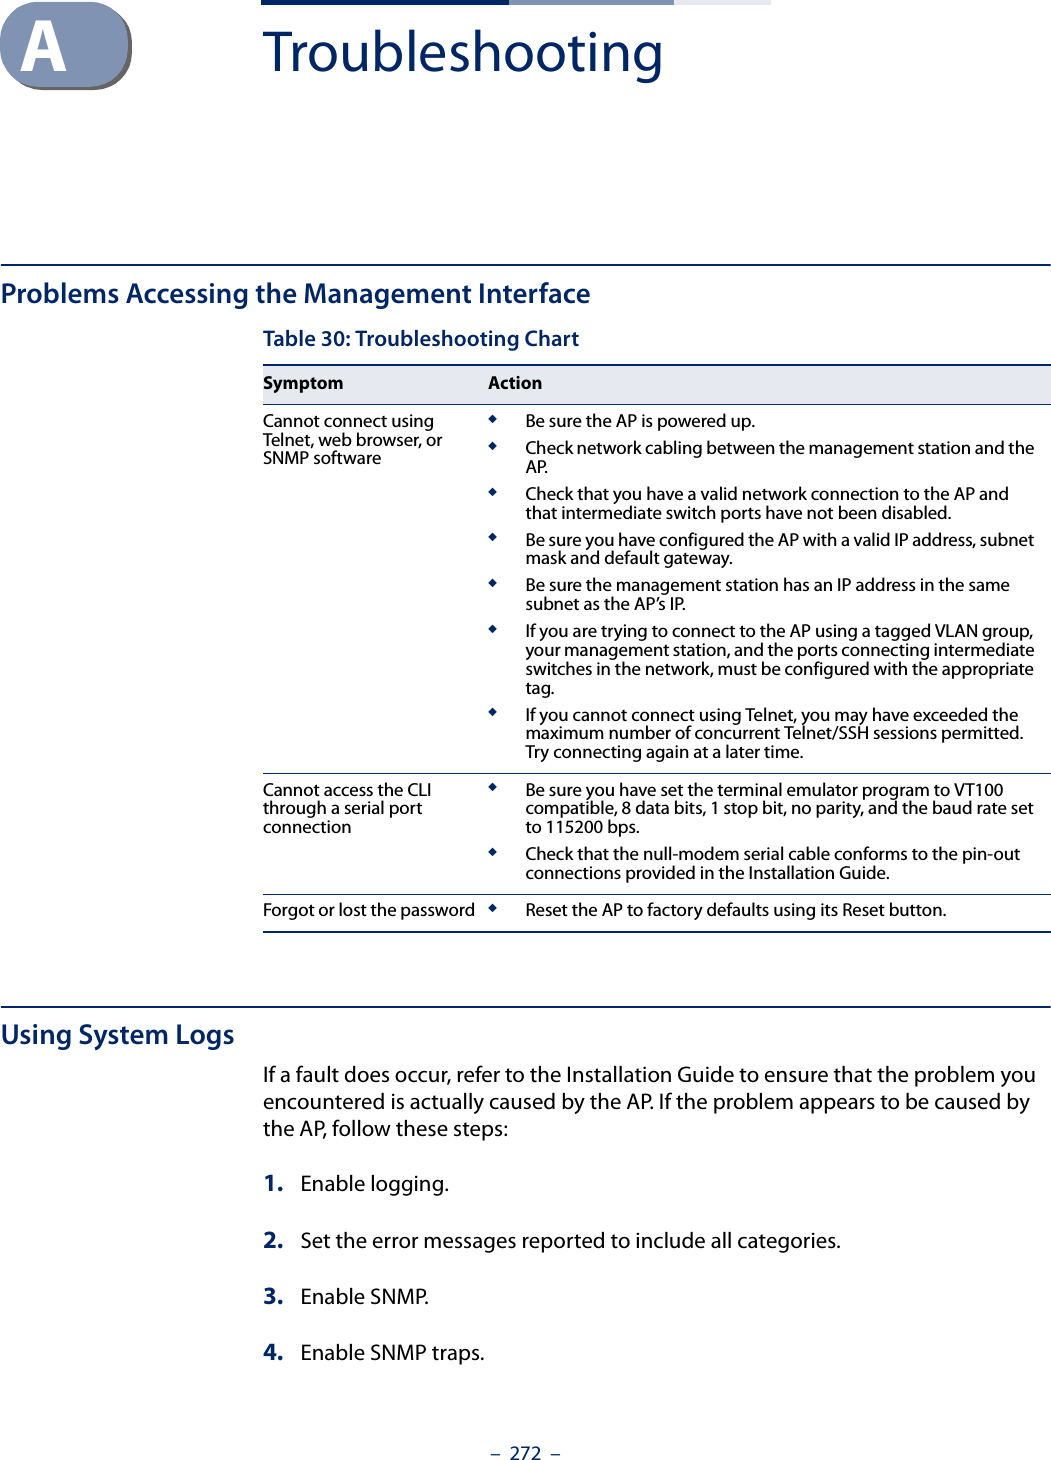 –  272  –ATroubleshootingProblems Accessing the Management Interface Using System LogsIf a fault does occur, refer to the Installation Guide to ensure that the problem you encountered is actually caused by the AP. If the problem appears to be caused by the AP, follow these steps:1. Enable logging. 2. Set the error messages reported to include all categories. 3. Enable SNMP.4. Enable SNMP traps.Table 30: Troubleshooting ChartSymptom ActionCannot connect using Telnet, web browser, or SNMP software◆Be sure the AP is powered up.◆Check network cabling between the management station and the AP.◆Check that you have a valid network connection to the AP and that intermediate switch ports have not been disabled.◆Be sure you have configured the AP with a valid IP address, subnet mask and default gateway.◆Be sure the management station has an IP address in the same subnet as the AP’s IP.◆If you are trying to connect to the AP using a tagged VLAN group, your management station, and the ports connecting intermediate switches in the network, must be configured with the appropriate tag. ◆If you cannot connect using Telnet, you may have exceeded the maximum number of concurrent Telnet/SSH sessions permitted. Try connecting again at a later time. Cannot access the CLI through a serial port connection◆Be sure you have set the terminal emulator program to VT100 compatible, 8 data bits, 1 stop bit, no parity, and the baud rate set to 115200 bps. ◆Check that the null-modem serial cable conforms to the pin-out connections provided in the Installation Guide. Forgot or lost the password ◆Reset the AP to factory defaults using its Reset button.